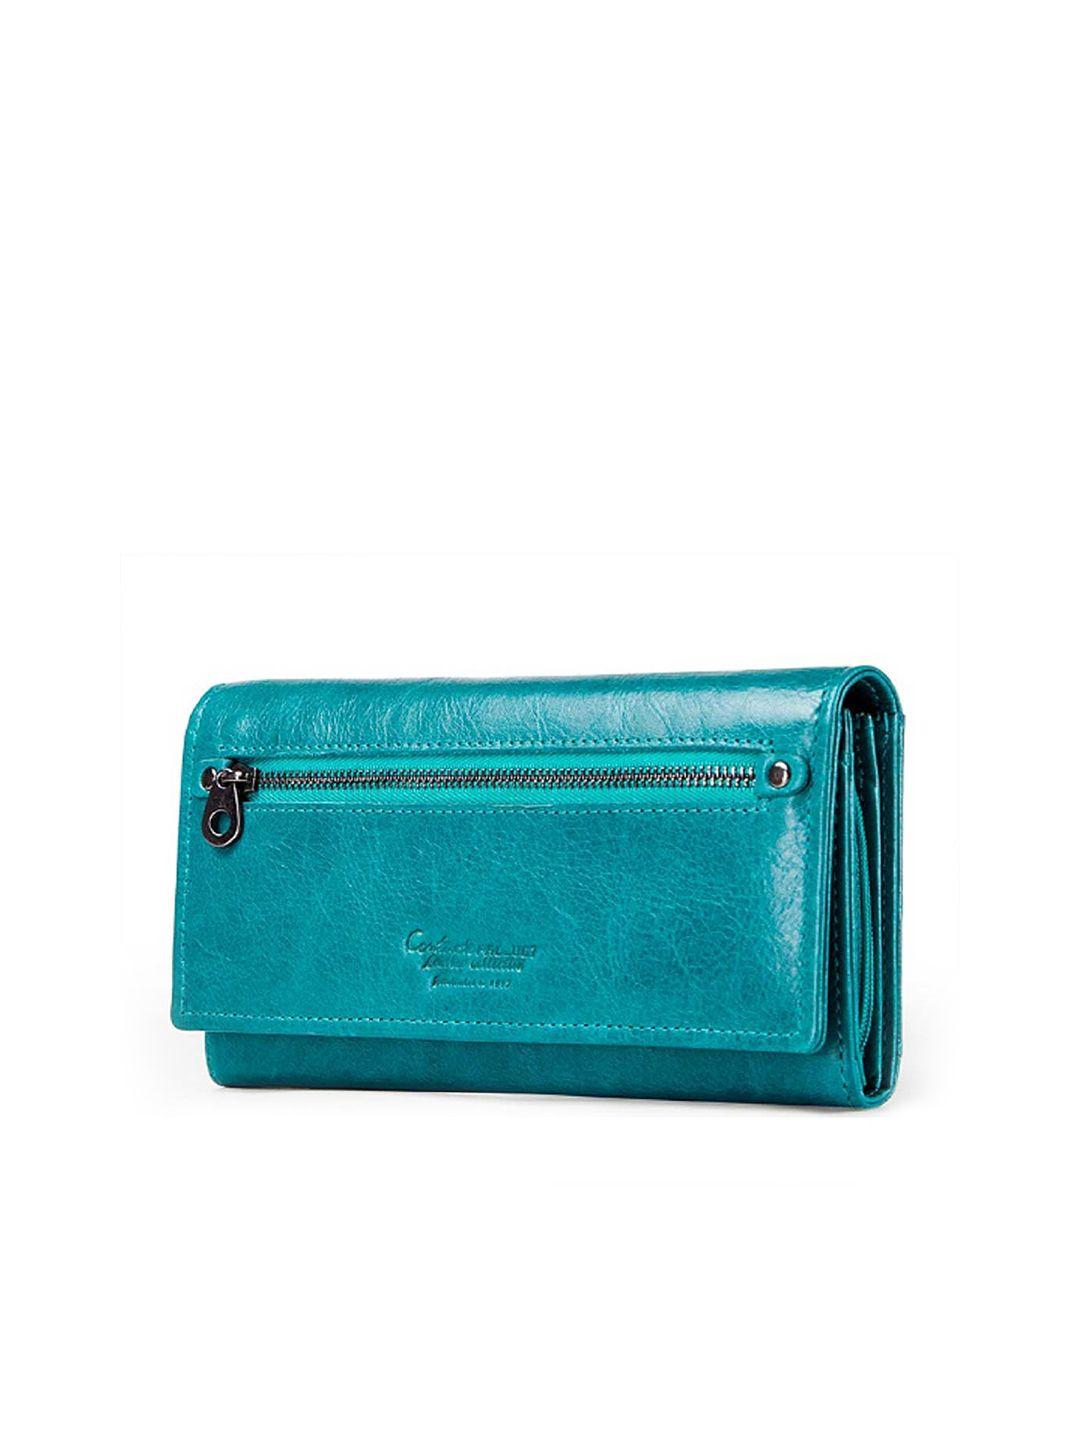 contacts women blue leather zip around wallet